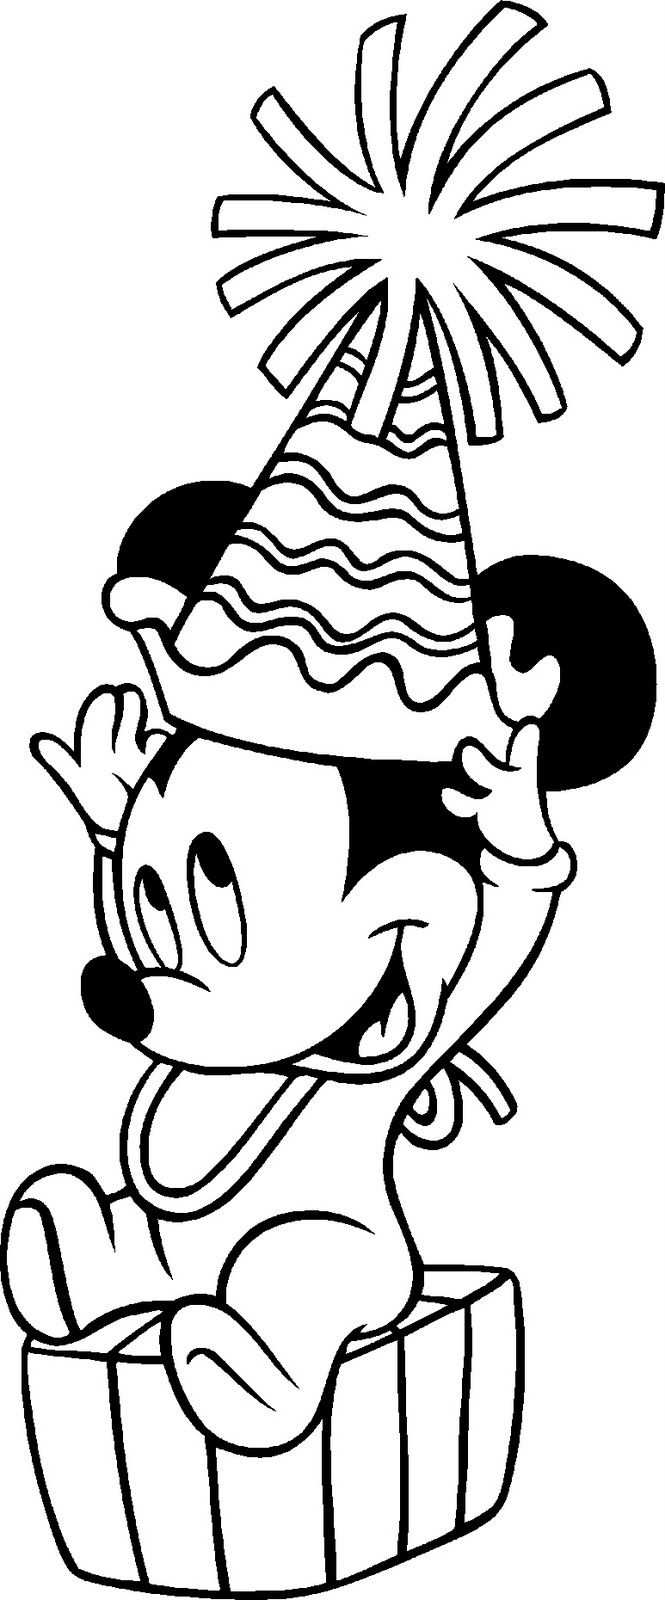 Disney Coloring Pages Mickey Mouse Coloring Pages Met